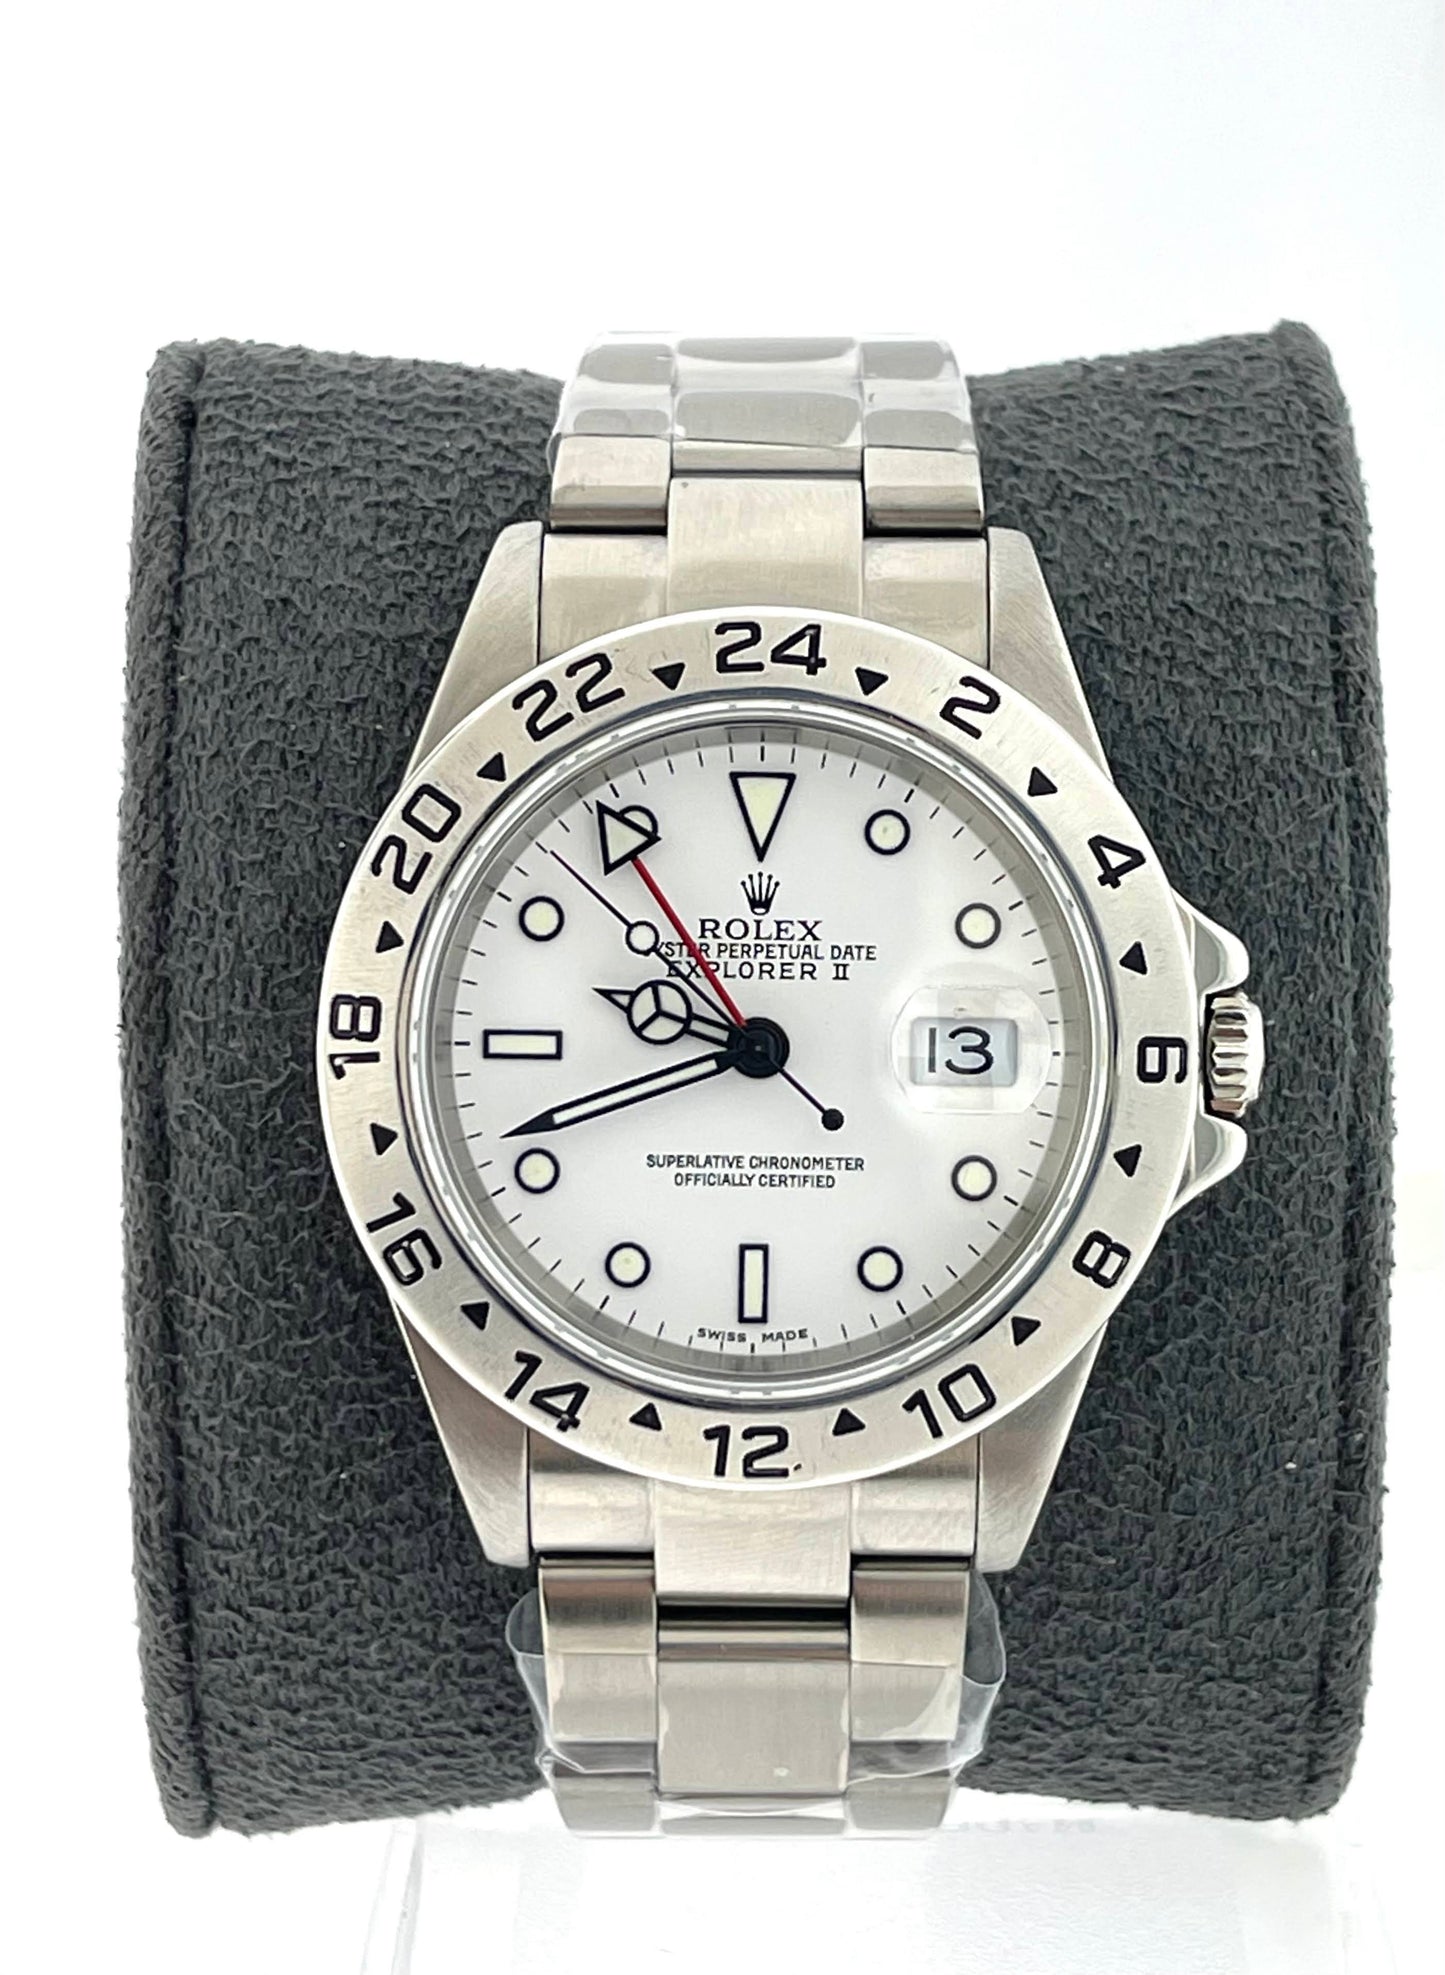 2006 Rolex Explorer II 16570 White Dial Oyster Bracelet No Papers 40mm